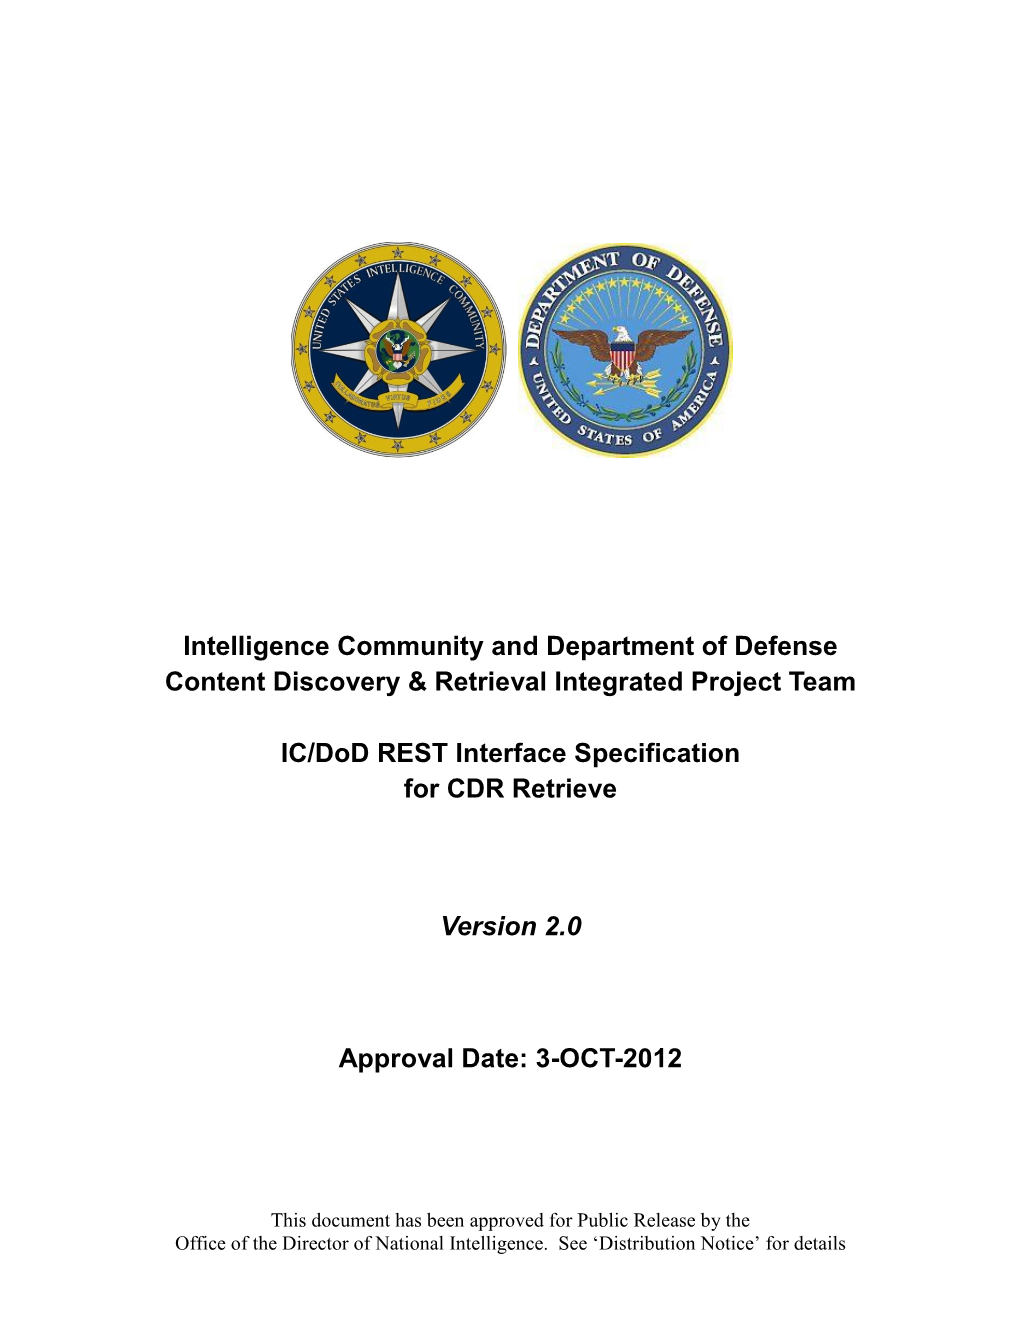 IC-Dod REST Interface Specification for CDR Retrieve